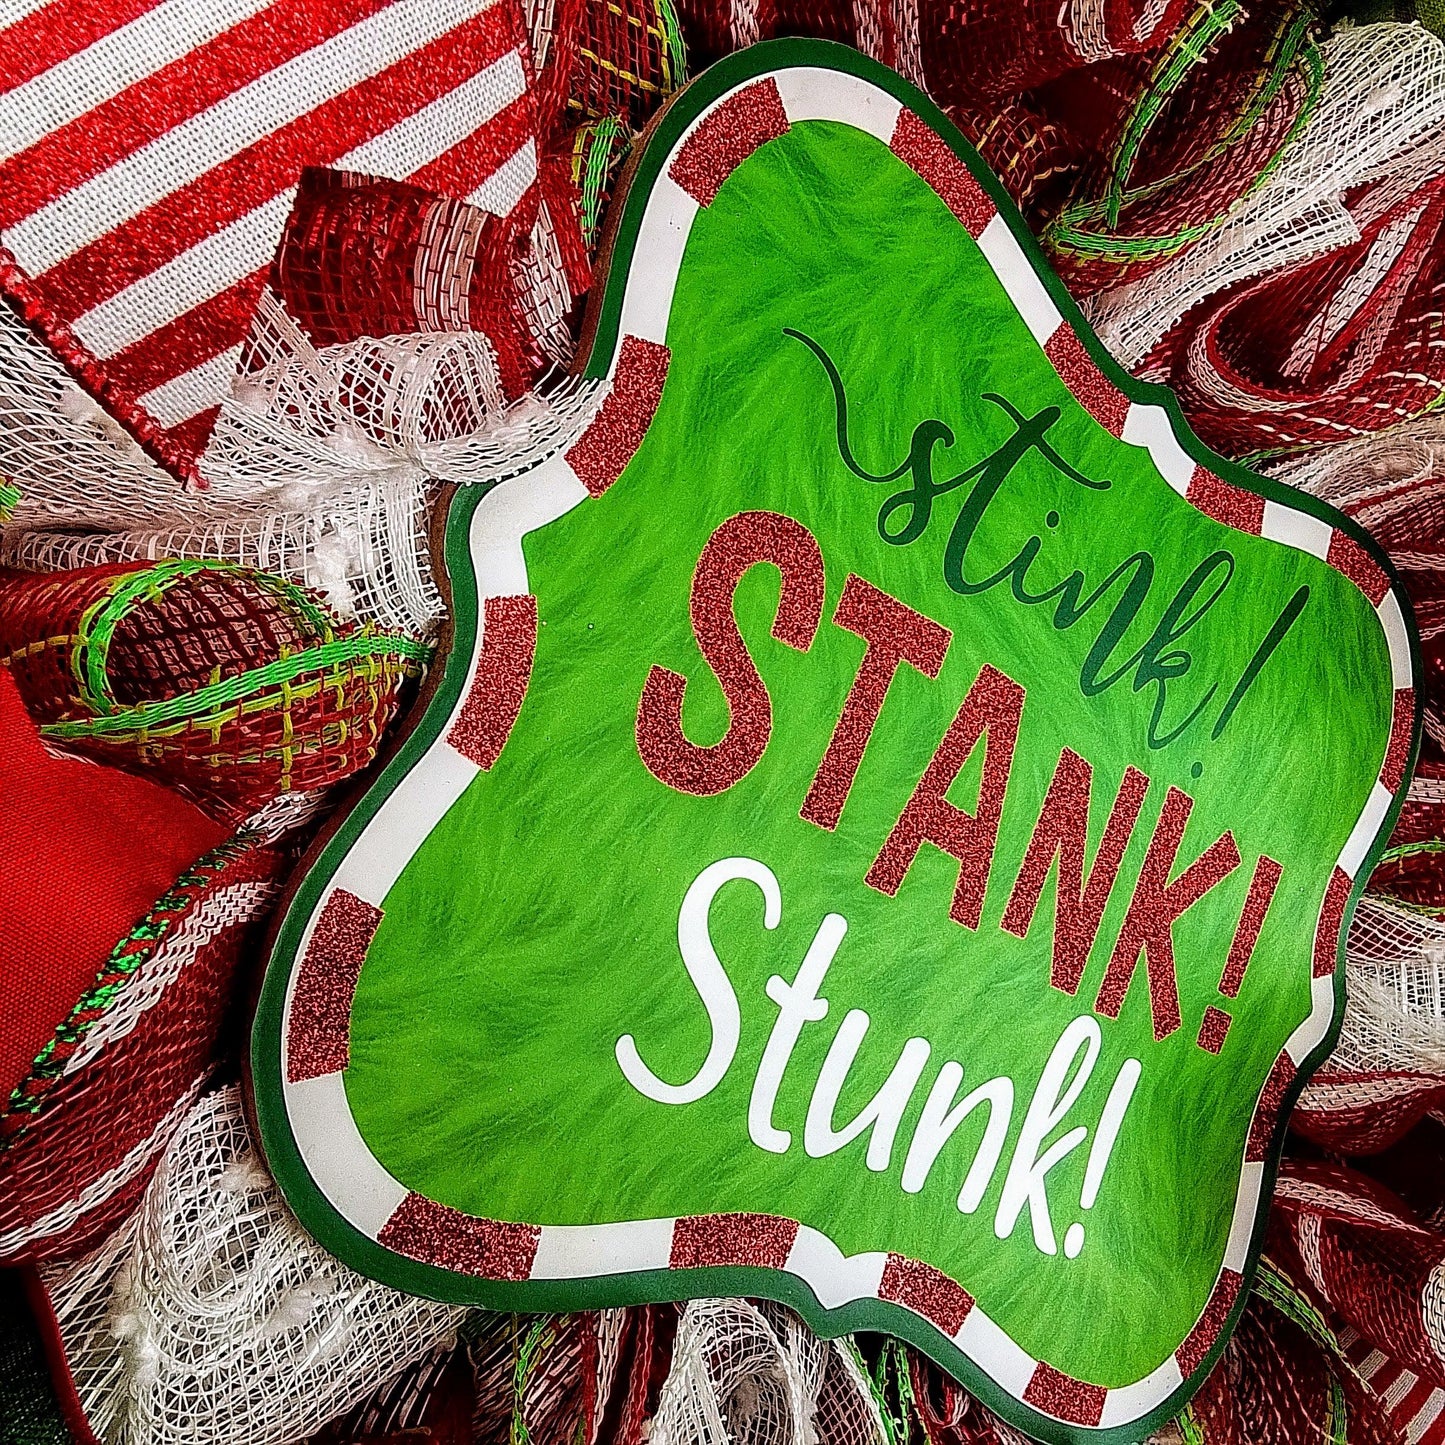 Stink Stank Stunk Christmas Wreath - Xmas Mesh Door Decor - Holiday Decorations - Red White Emerald Lime Green - Pink Door Wreaths